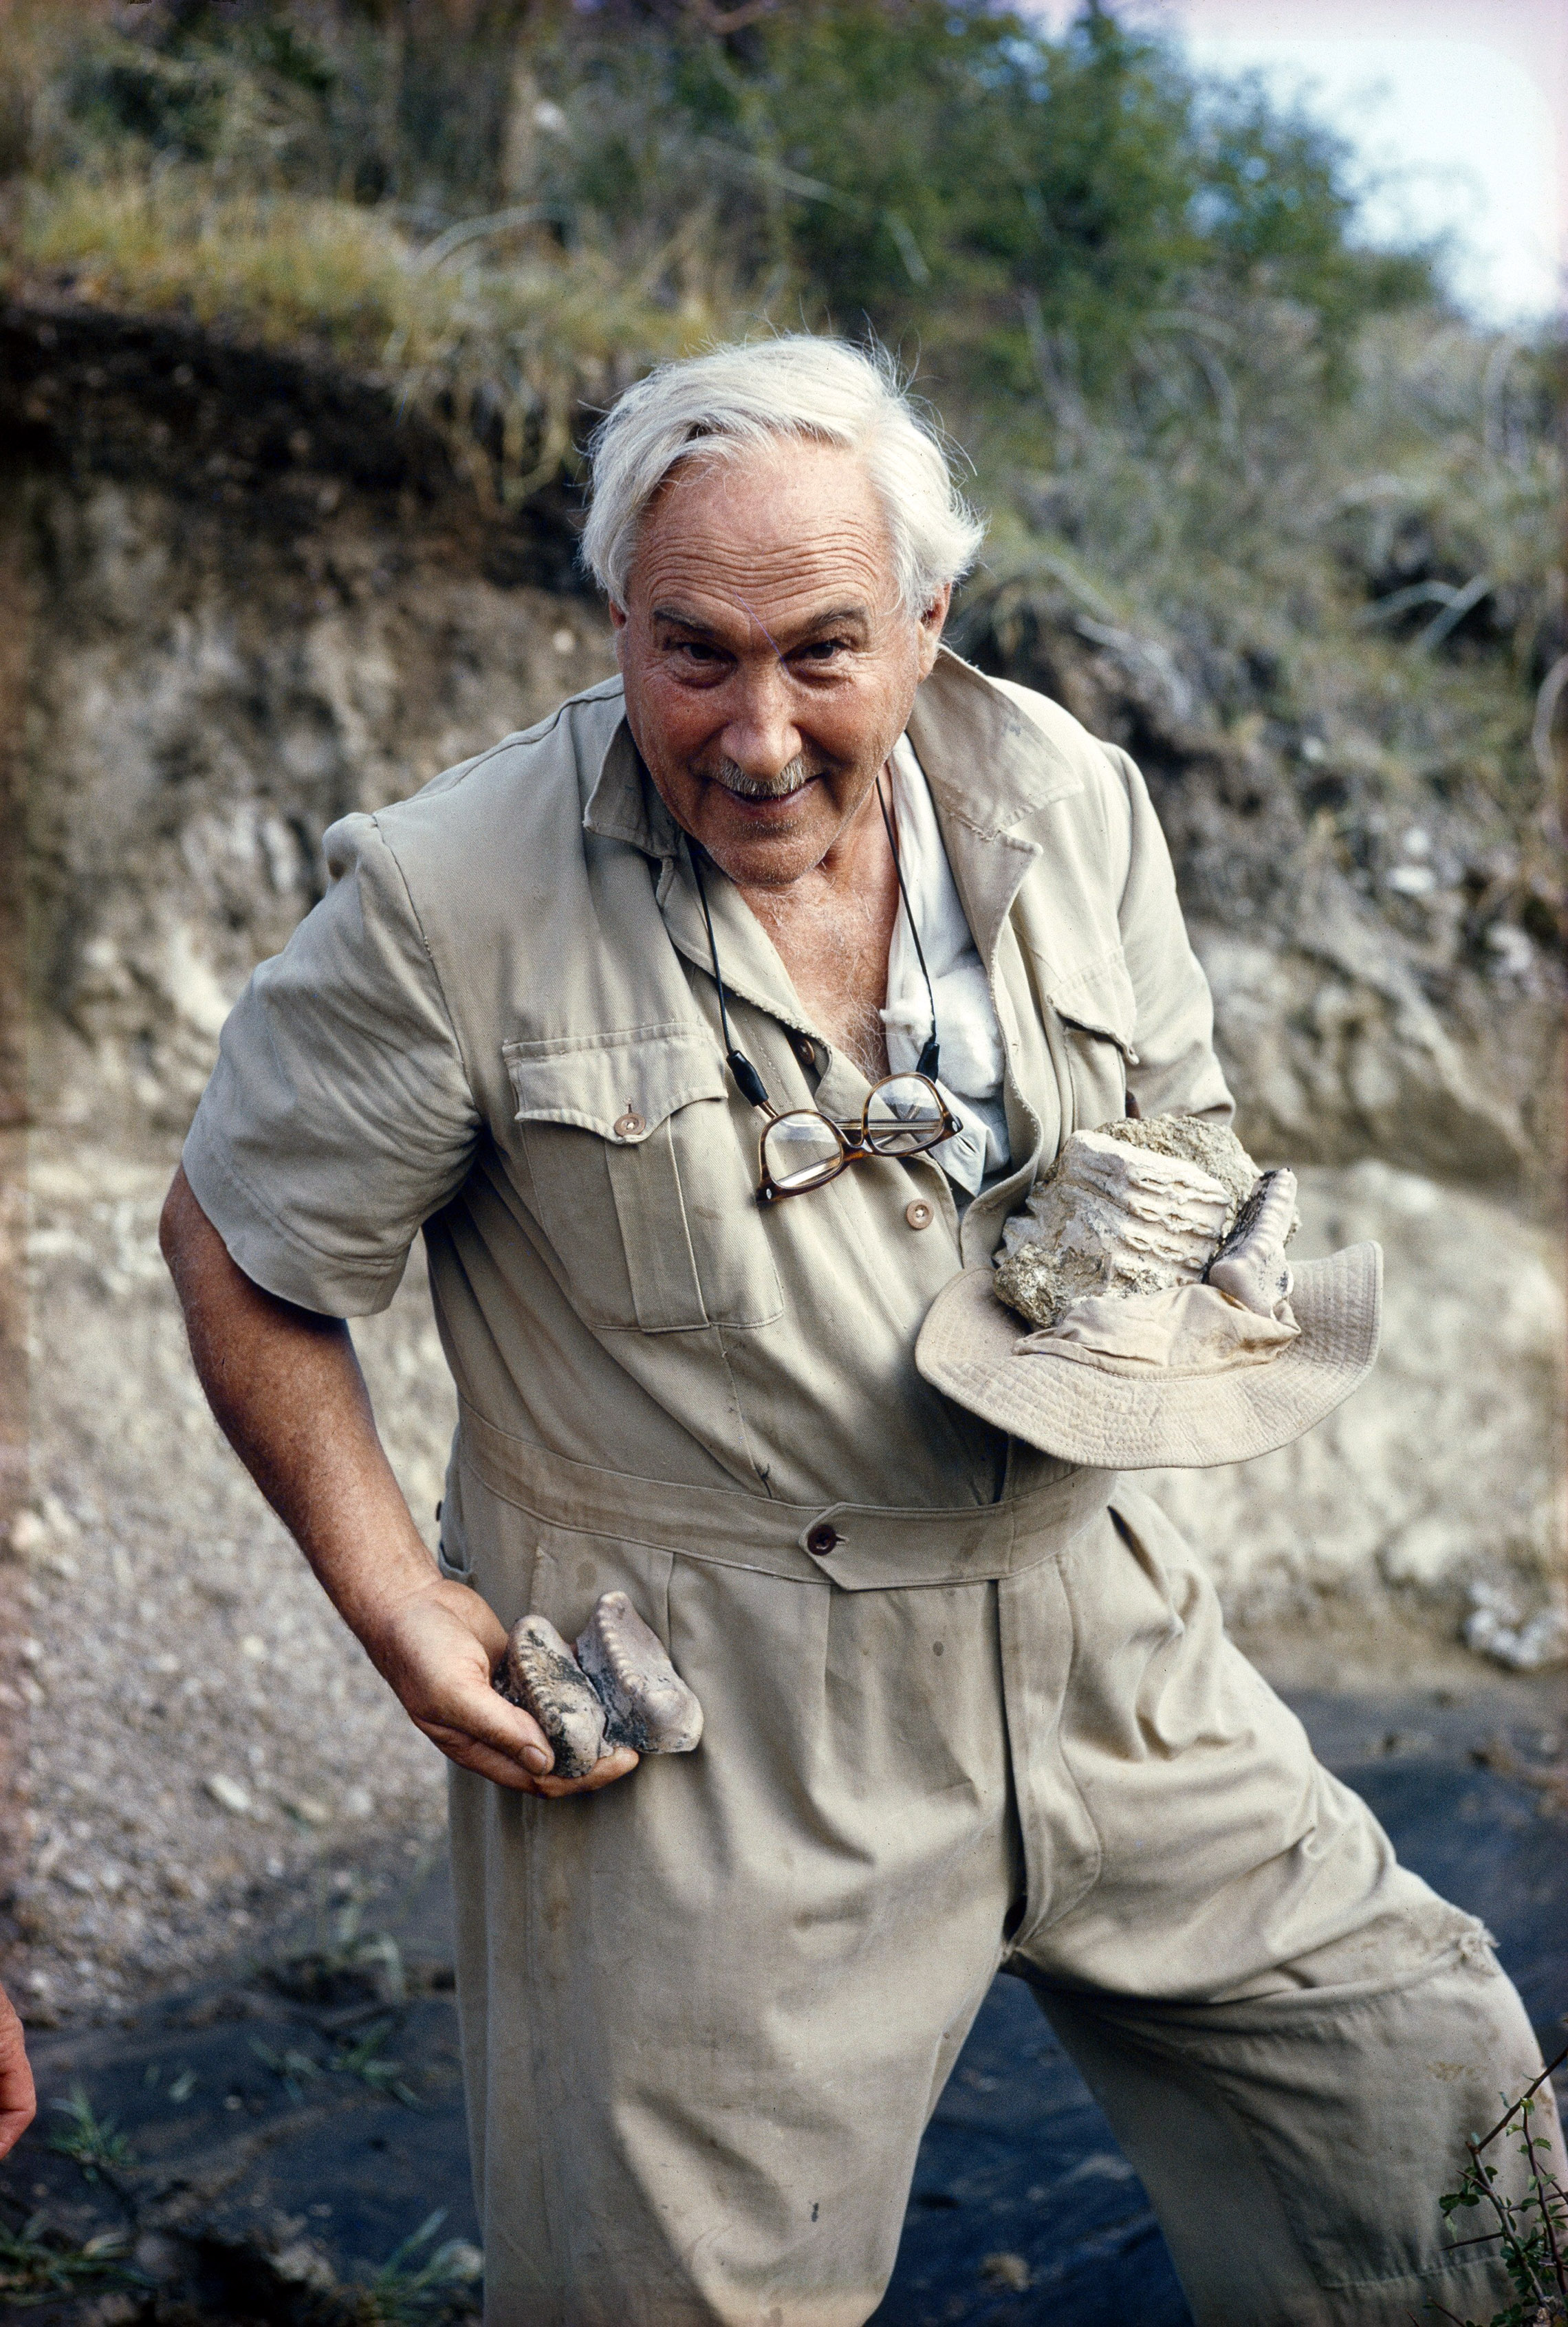 Louis Leakey (1903-1972), the pioneering paloeanthropologist who mentored a generation of scientists in East Africa, including Jane Goodall. (Photo by Melville B. Grosvenor/National Geographic/Getty Images )